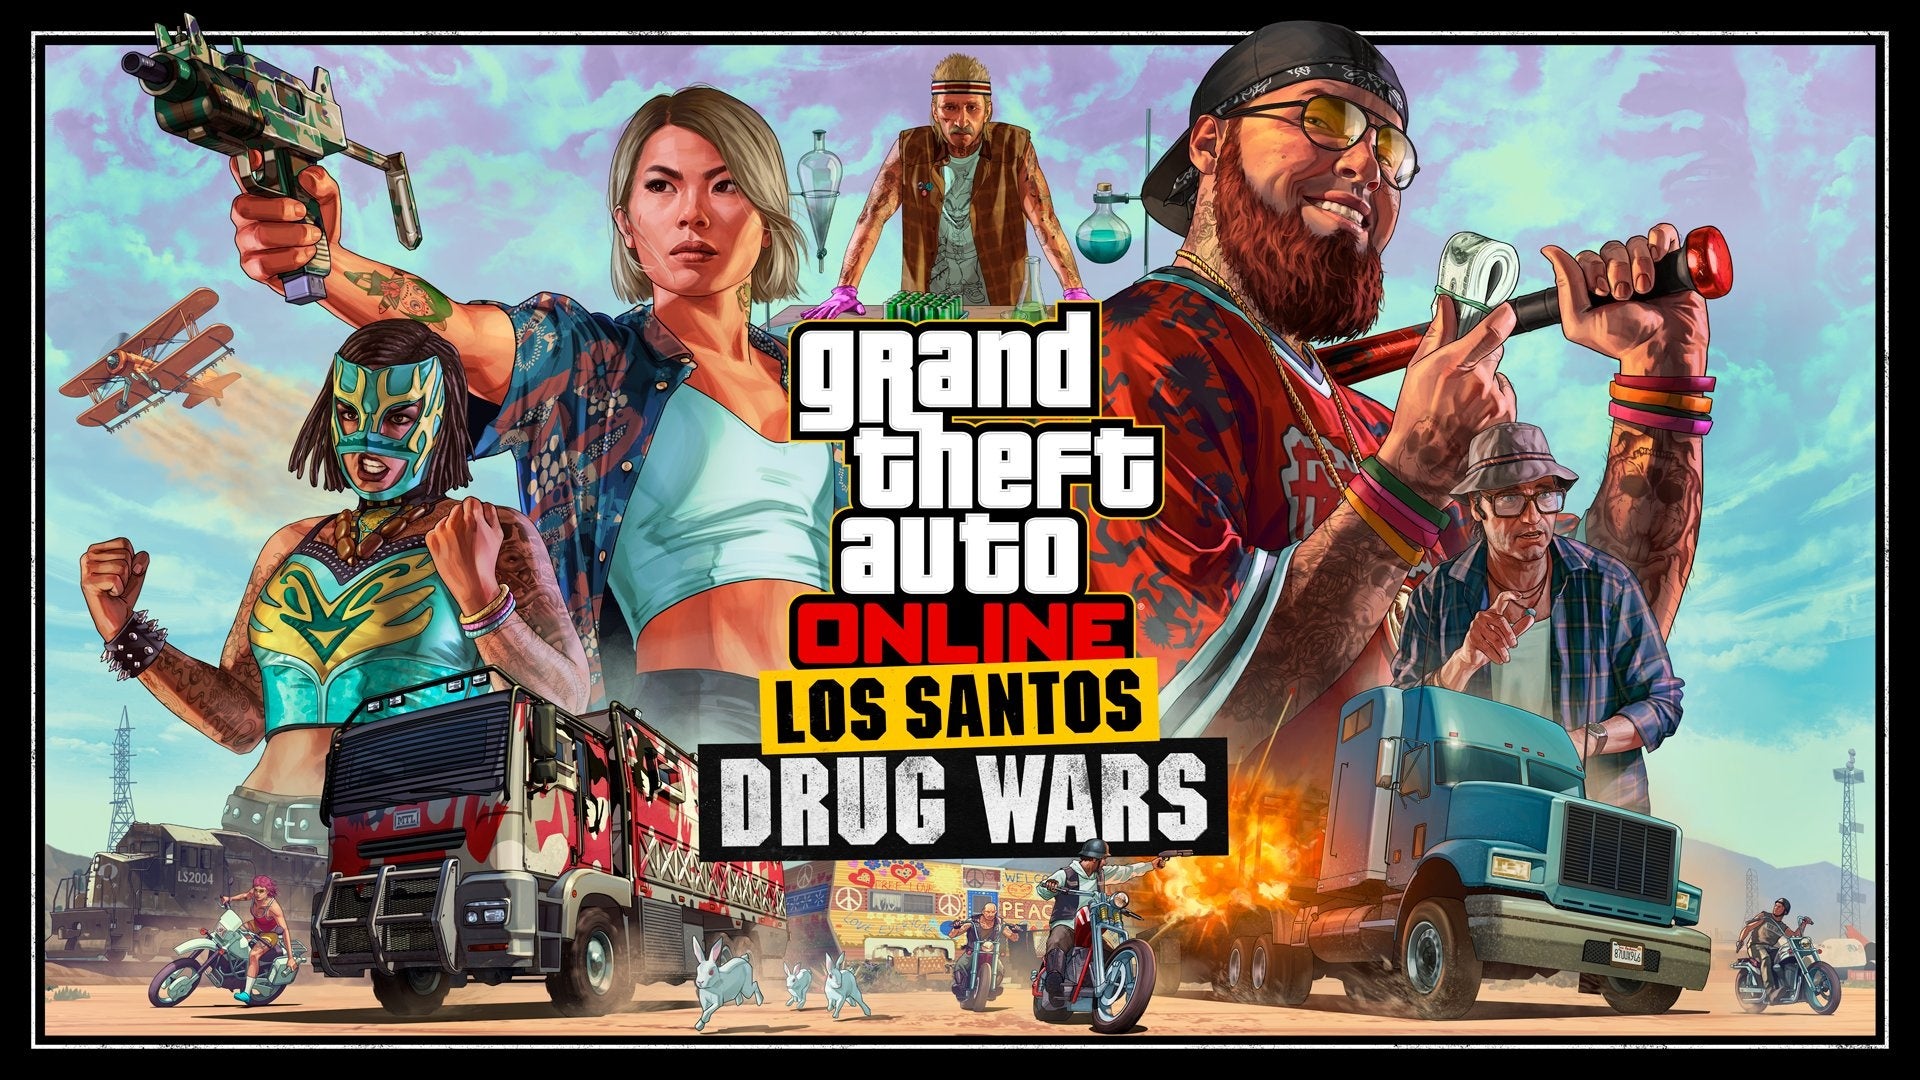 Key art from GTA Online's Los Santos Drug Wars story update showing trucks racing in the desert and characters holding weapons and money